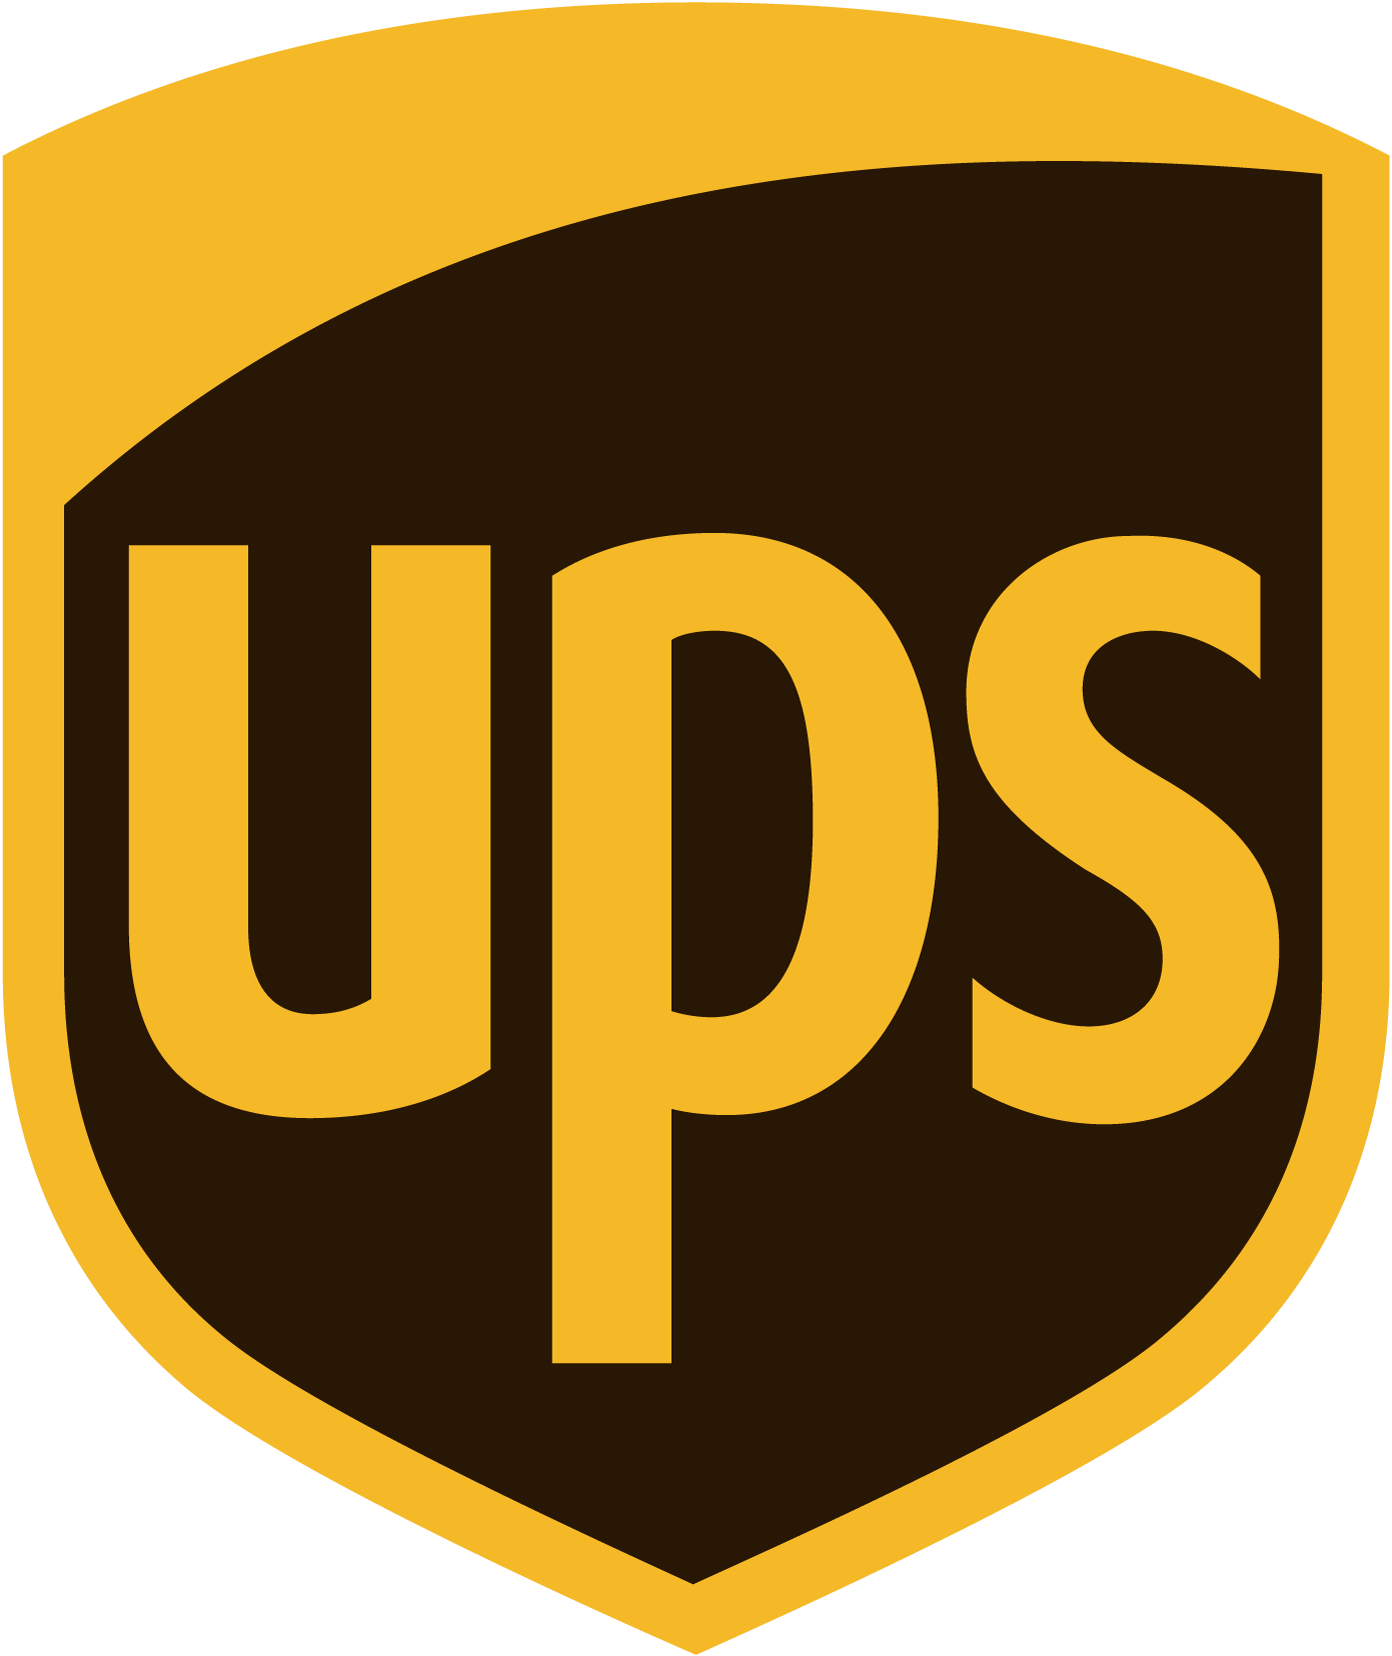 Ups strategic management insight. Vision clipart personal mission statement